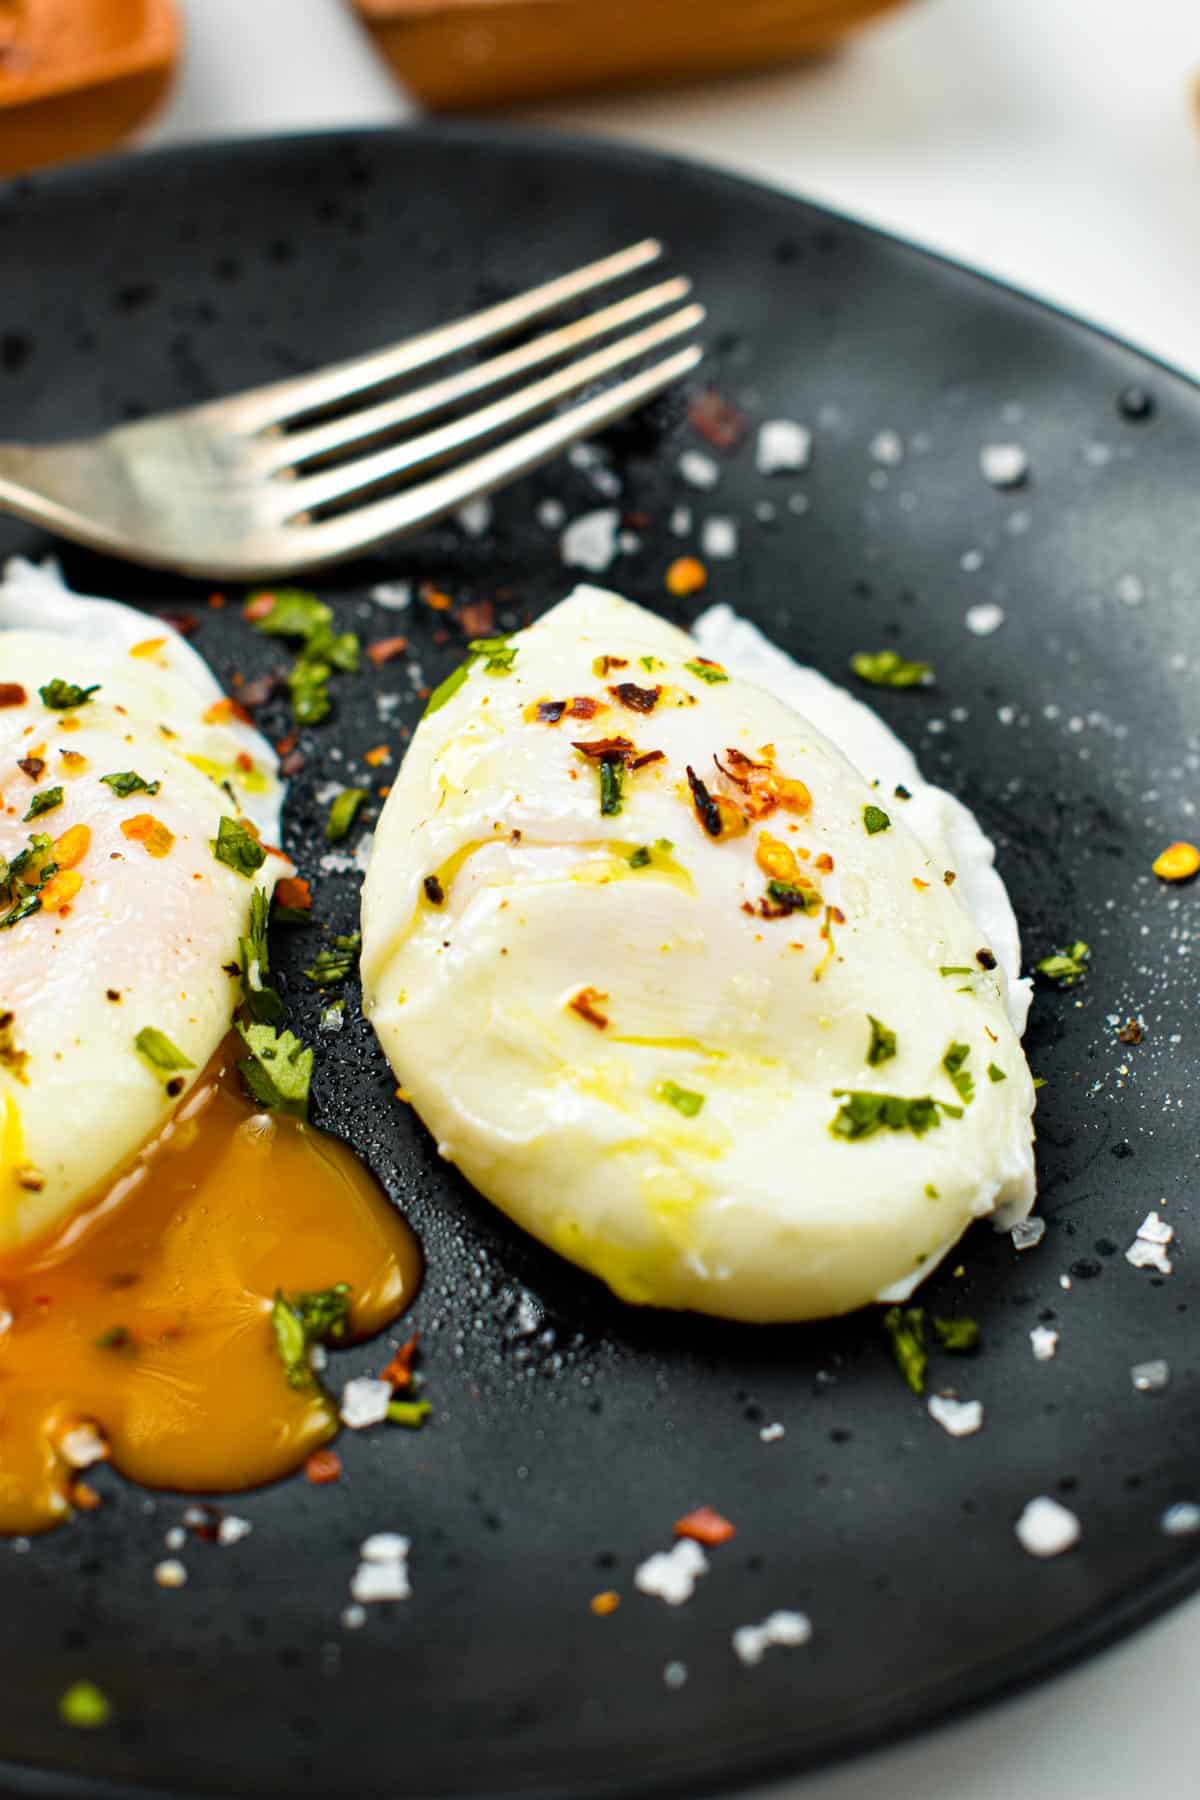 Learn How to Make Poached Eggs that are perfect every time with this simple poached egg recipe. Plus, this step by step instructions are easy to follow and required minimal kitchen skills to starts.